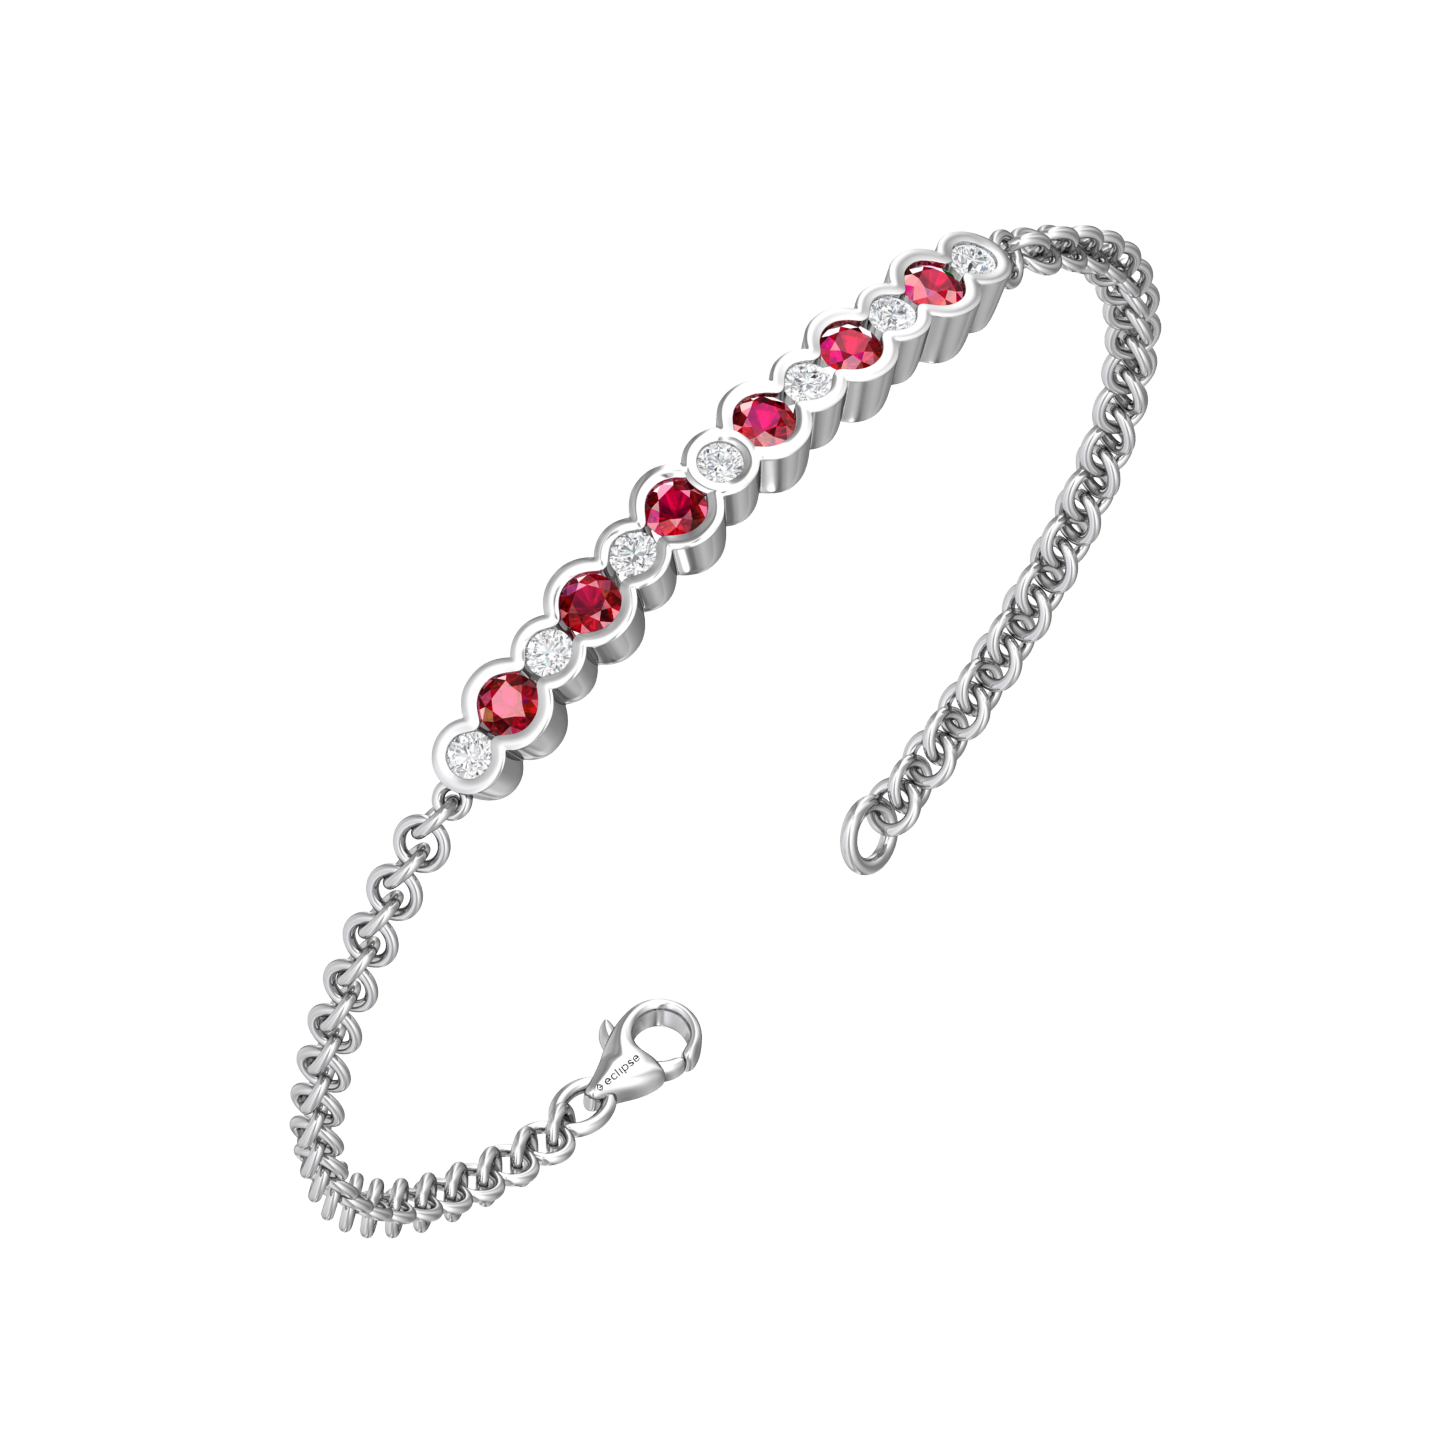 Eclipse Collection Ruby and Diamond Bracelet  Gardiner Brothers 18ct White Gold  